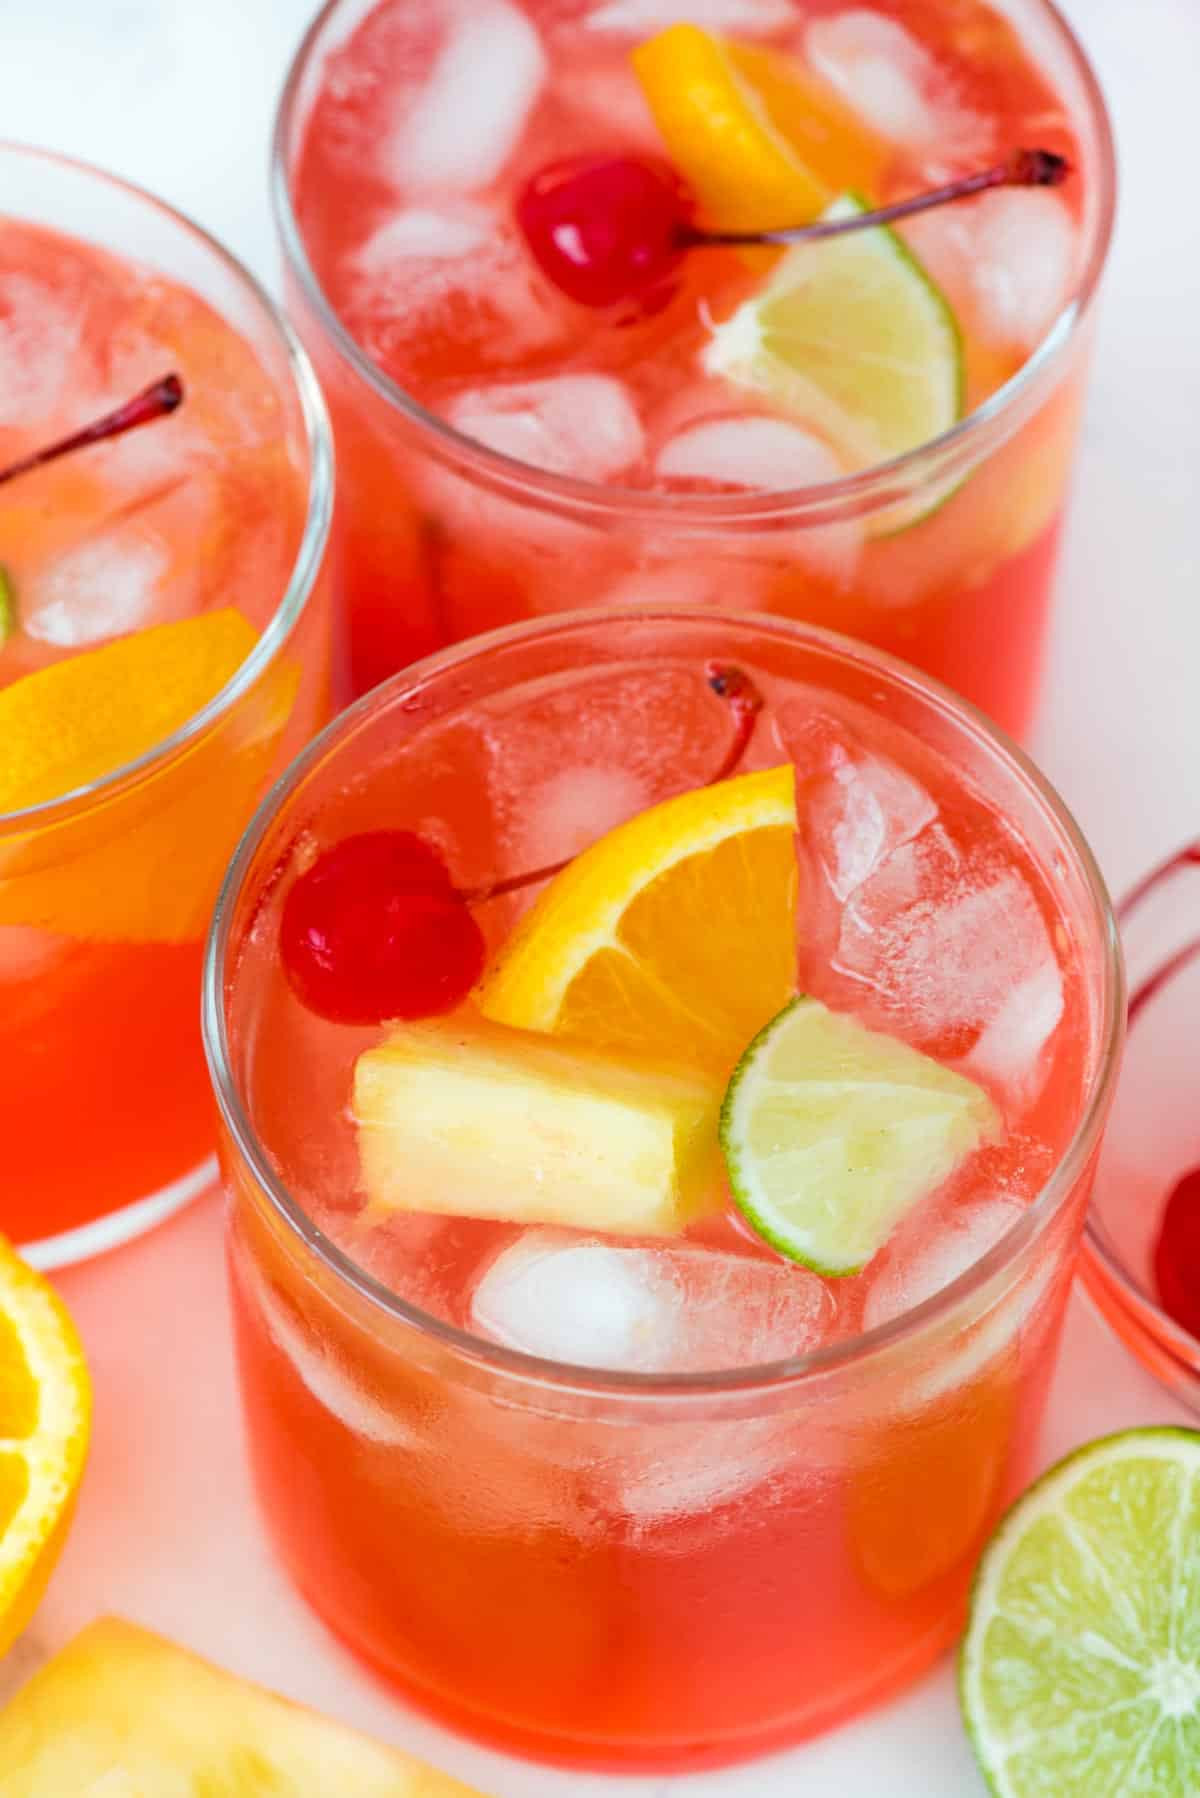 Fruit Mix Drinks With Vodka
 Fruity Vodka Party Punch Crazy for Crust